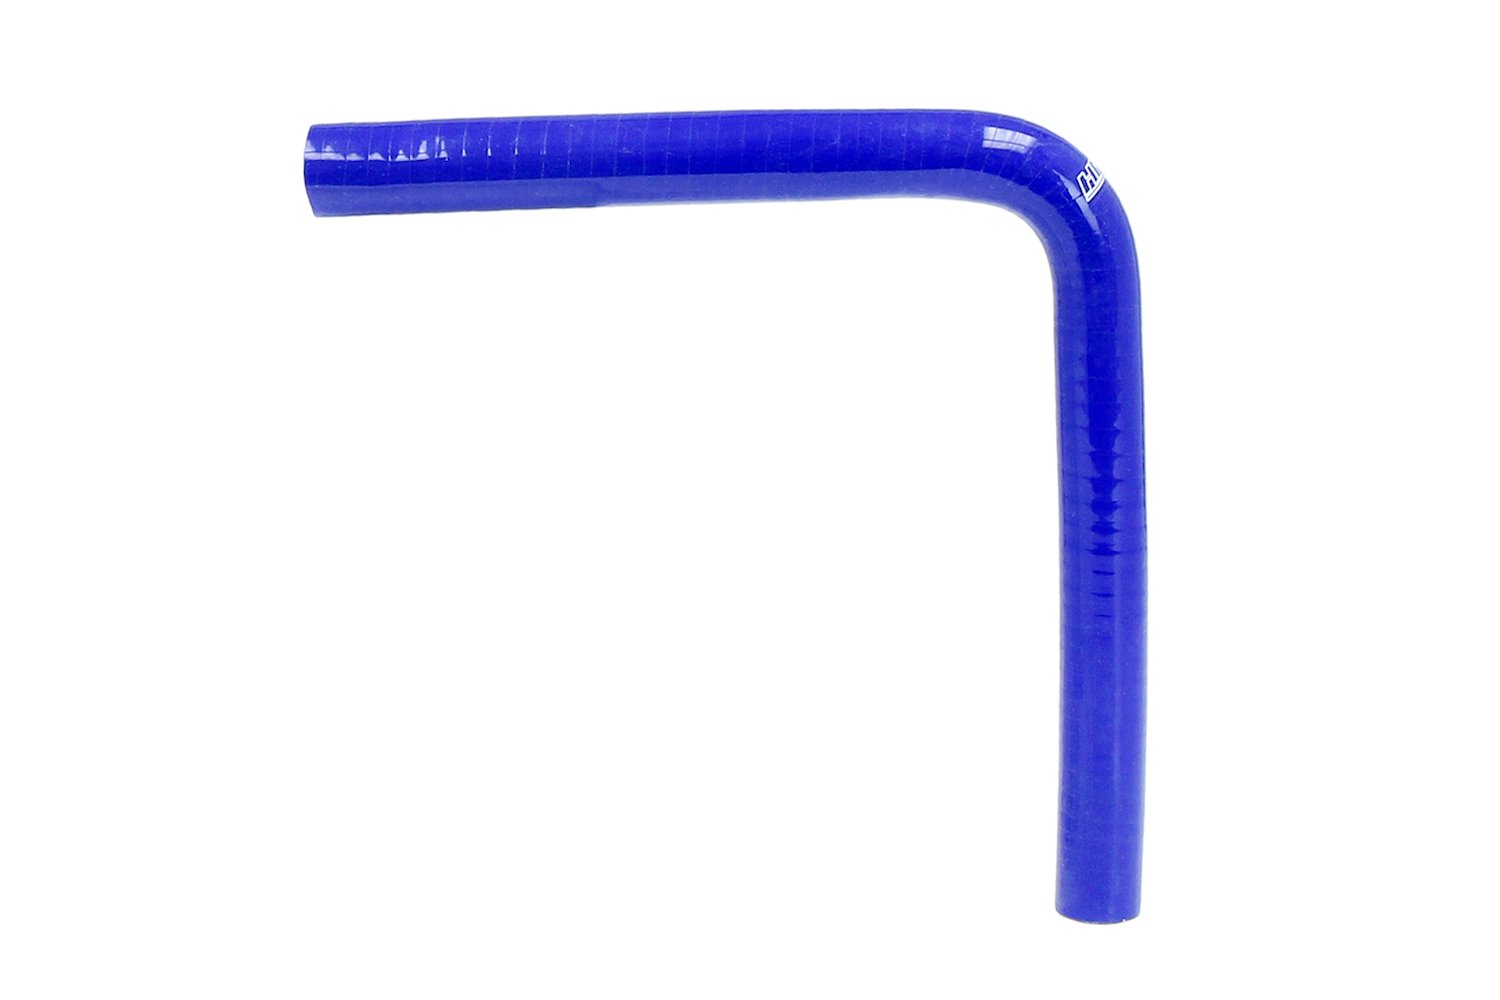 HTSEC90-150-L10-BLUE Silicone 90-Degree Elbow Hose, High-Temp 4-Ply Reinforced, 1-1/2 in. ID, 10 in. Leg, Blue